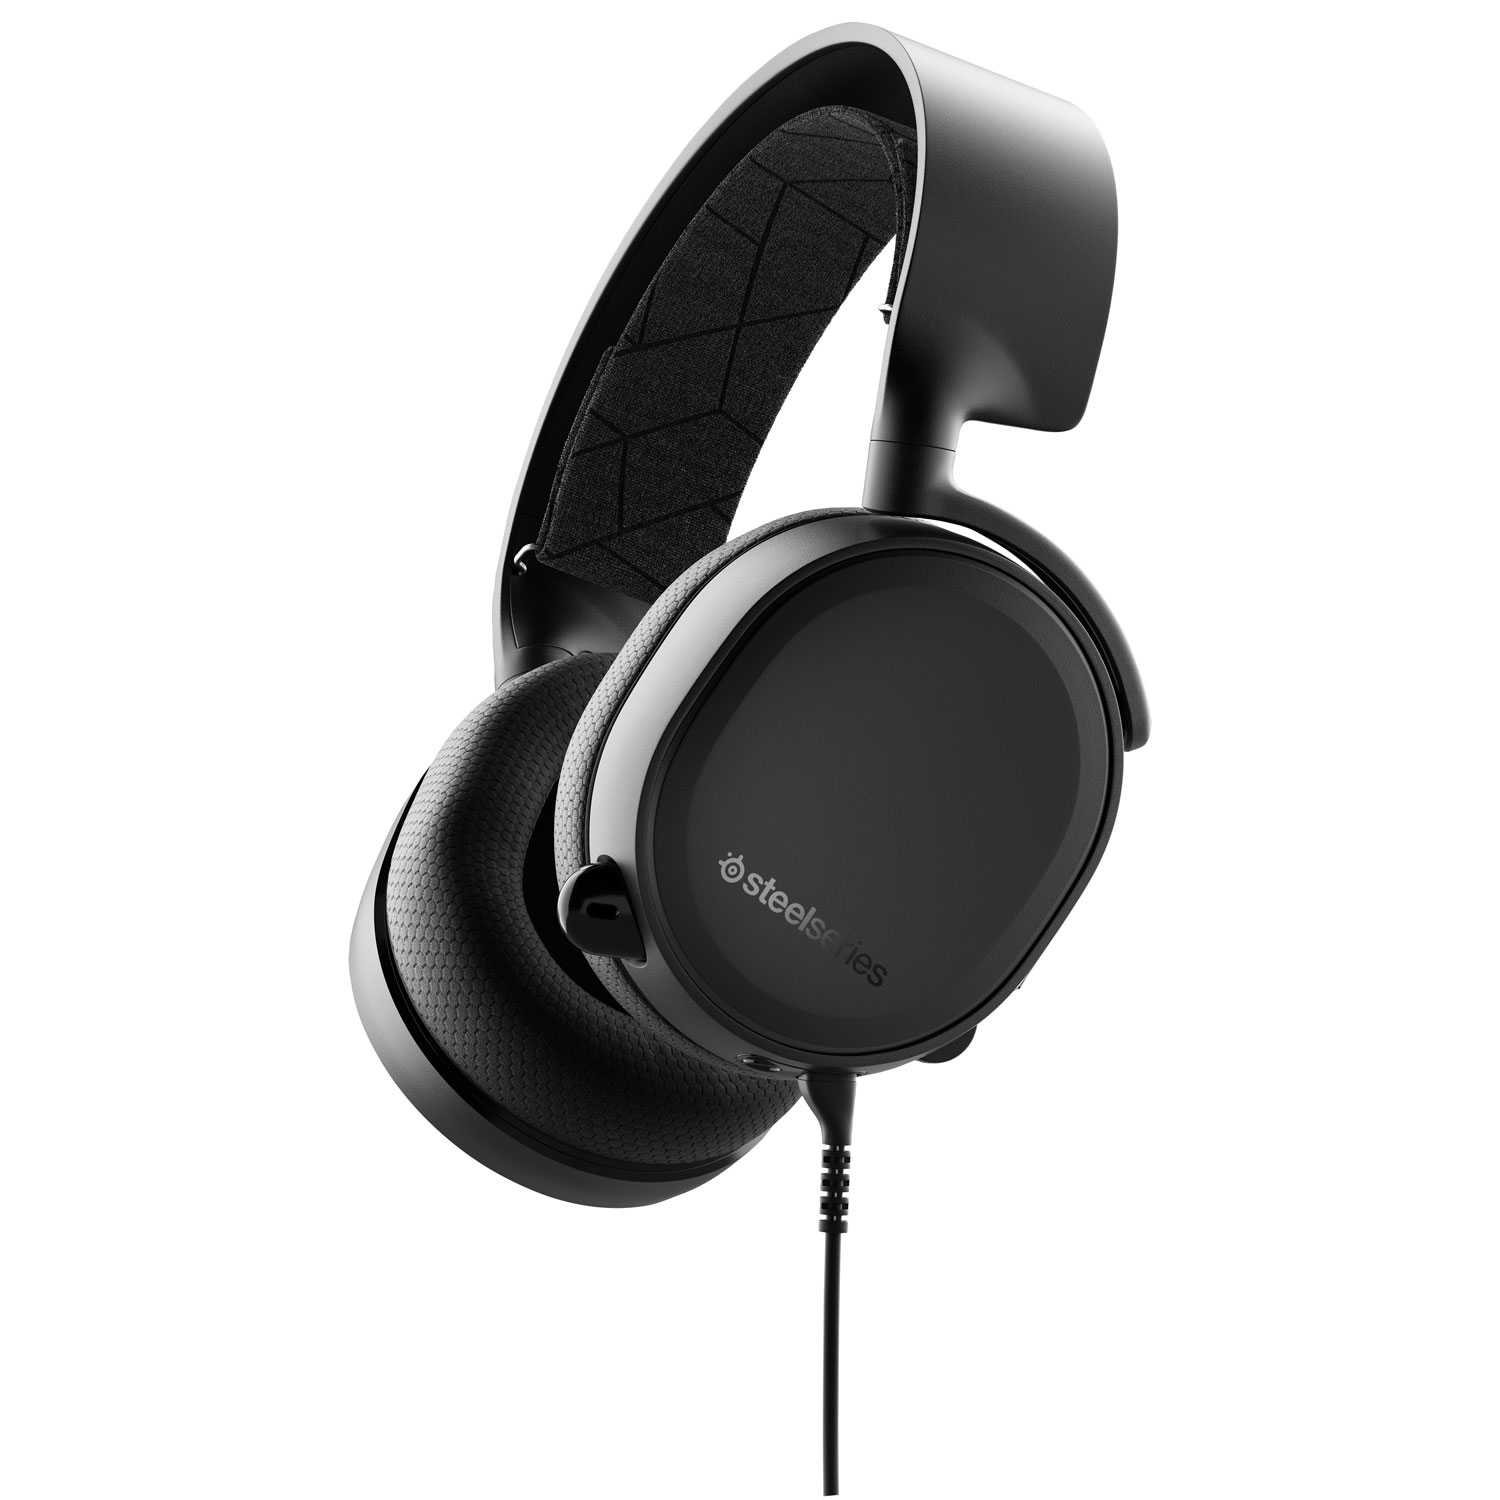 SteelSeries Arctis 3 (2019 Edition) All-Platform Gaming Headset for PC/PS4/Xbox One/Switch - Black